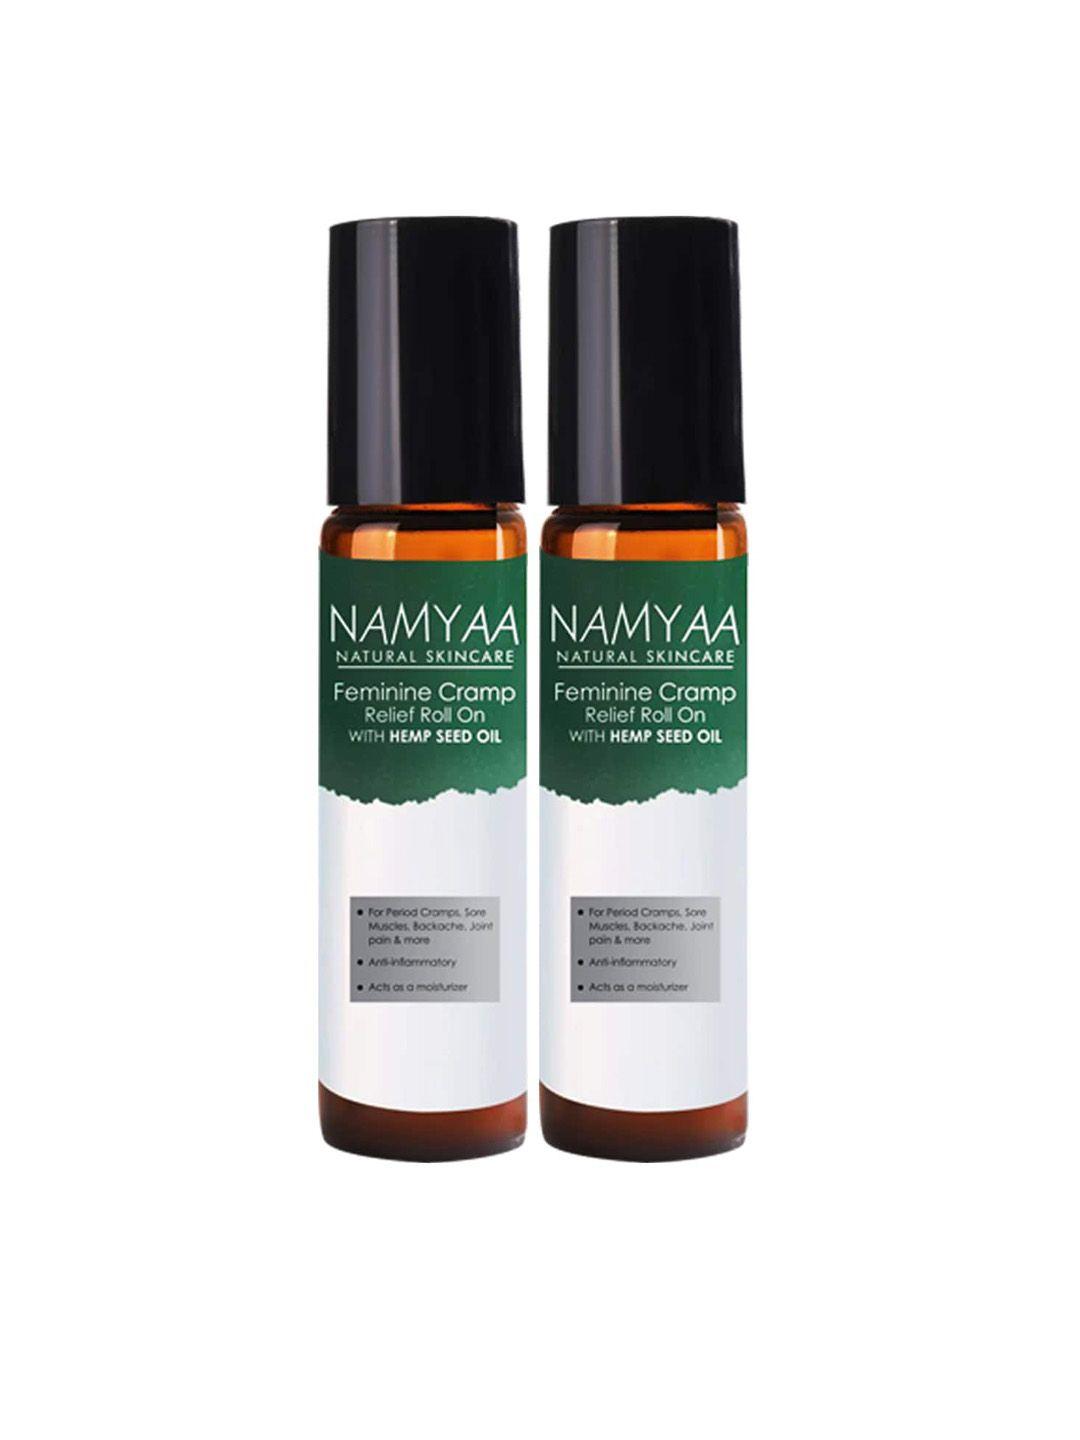 namyaa-set-of-2-cramp-relief-roll-on-with-hemp-seed-oil---20-ml-each